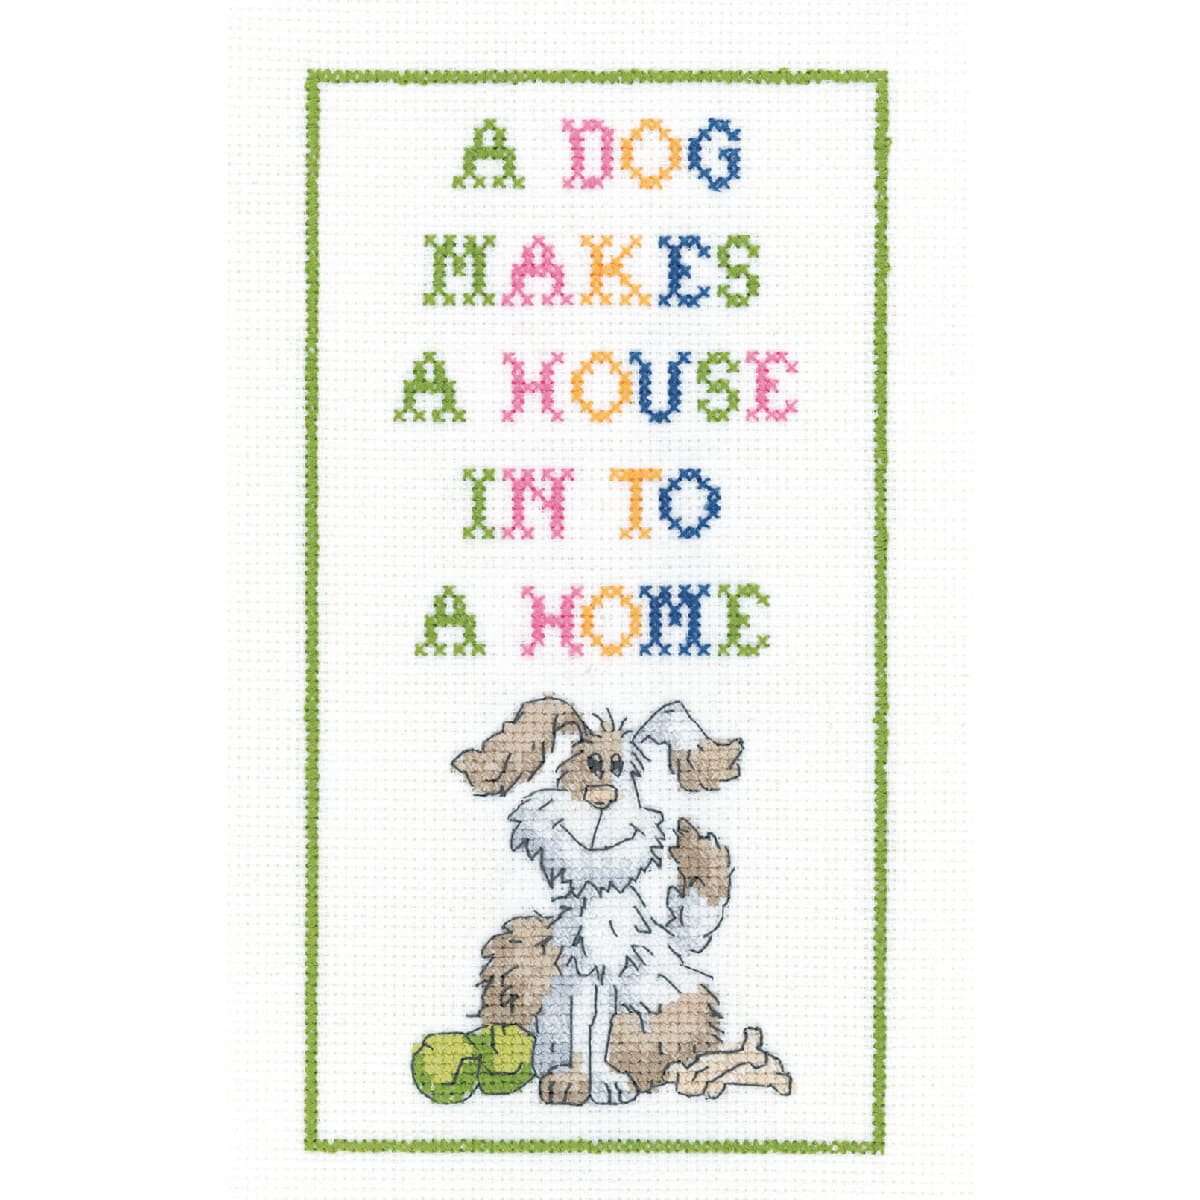 Heritage counted cross stitch kit Aida "House in to...